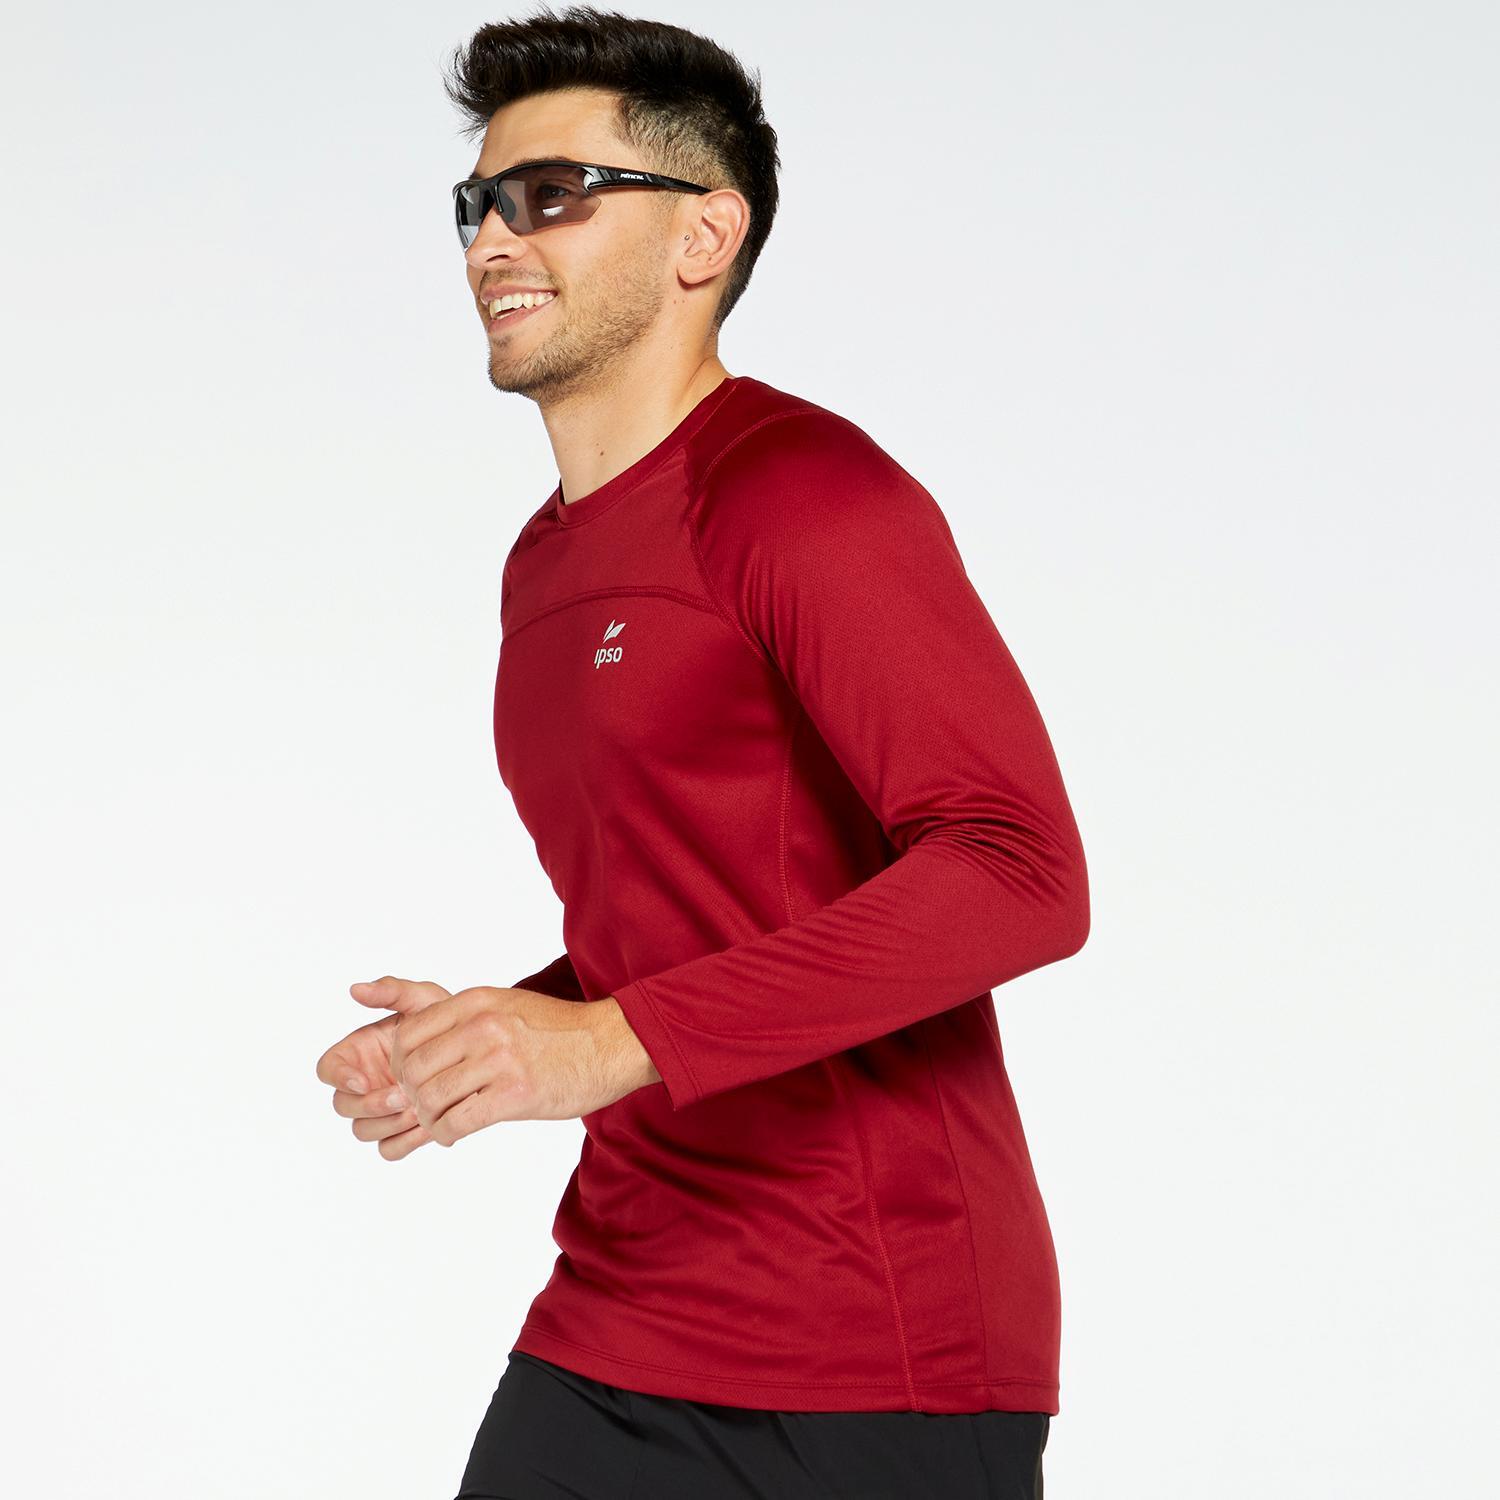 Ipso Basic - Rouge - T-shirt Running Homme sports taille 2XL